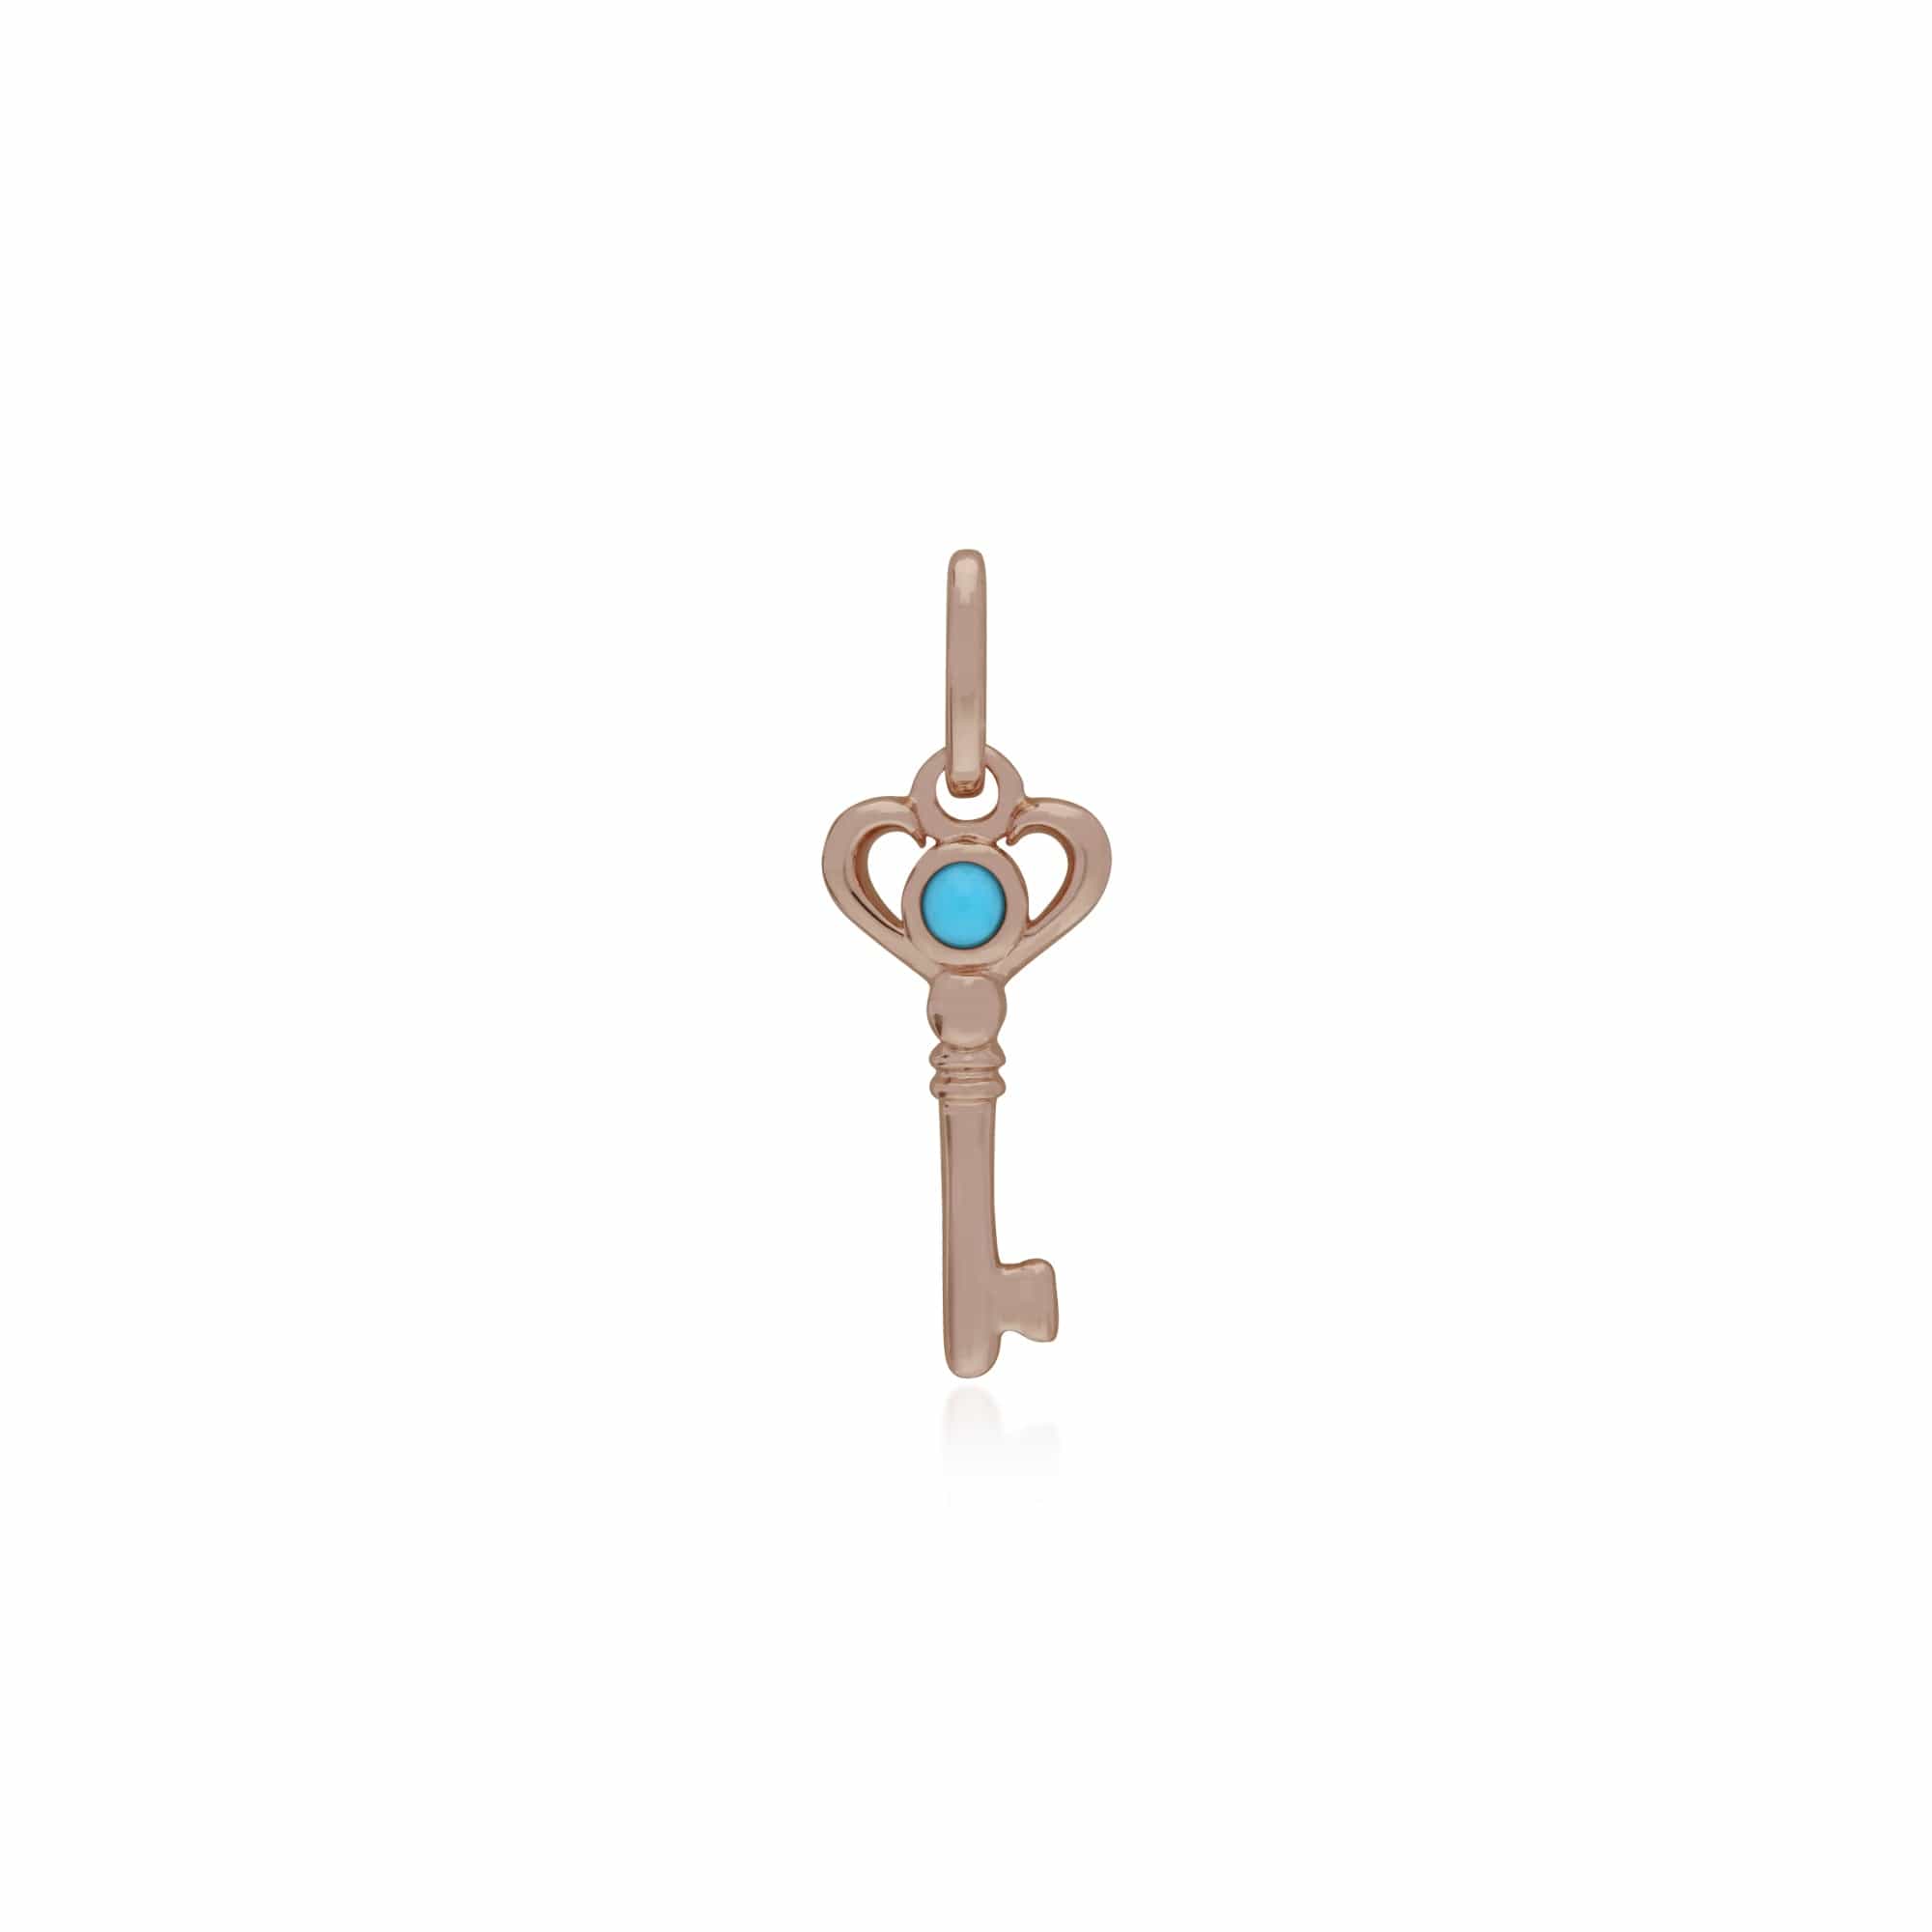 270P027402925-270P026501925 Classic Swirl Heart Lock Pendant & Turquoise Key Charm in Rose Gold Plated 925 Sterling Silver 2